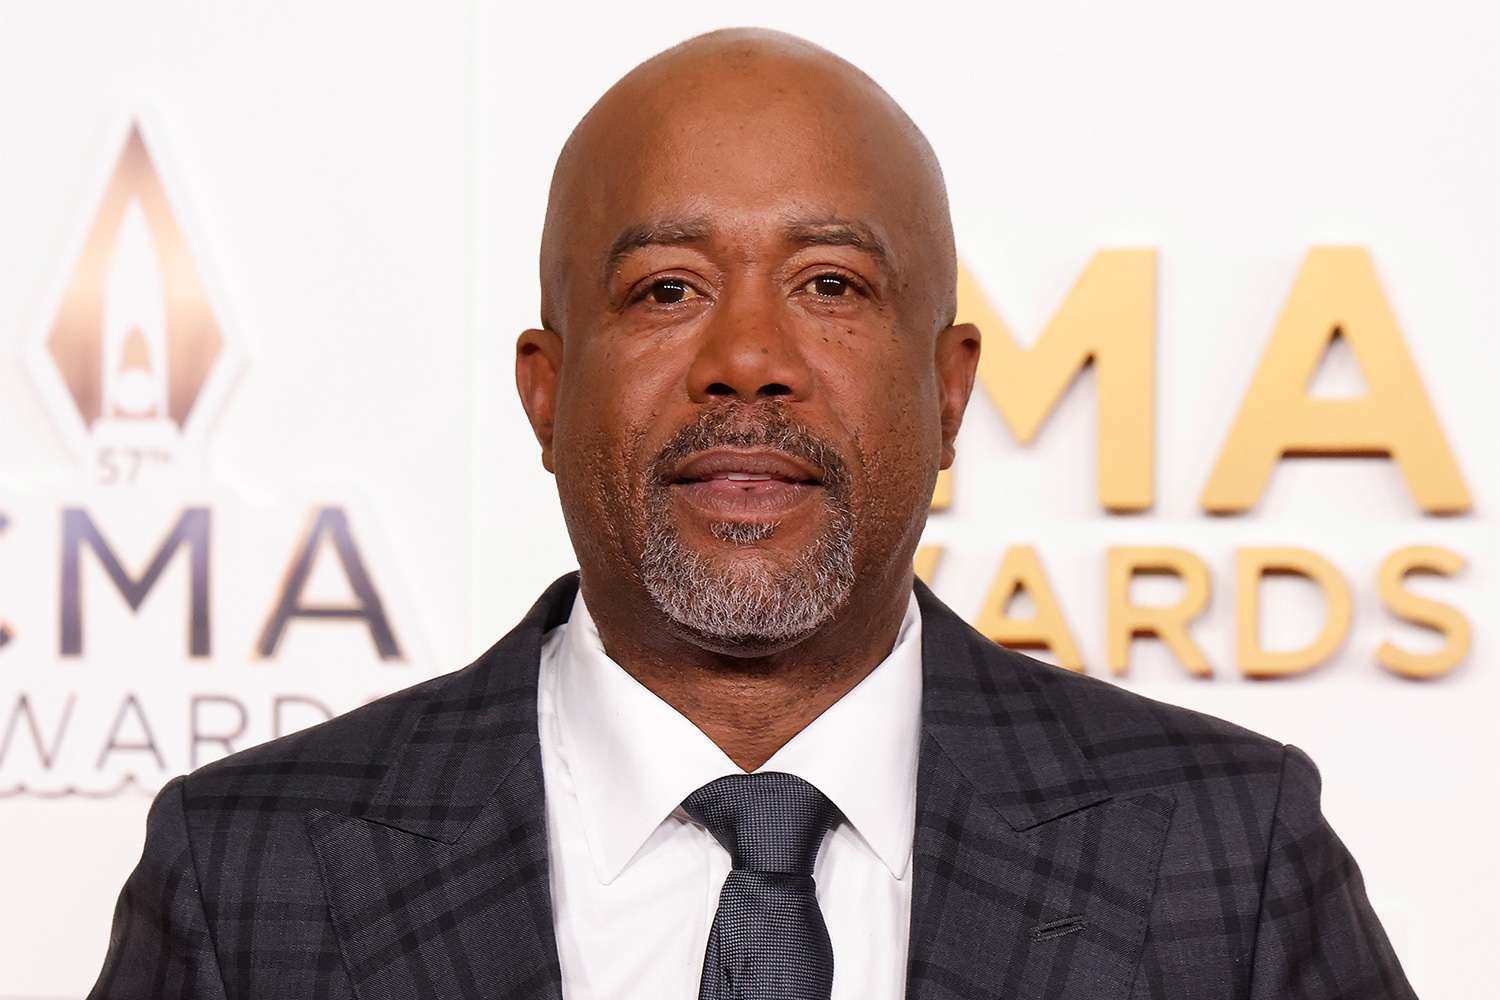 Darius Rucker speaks out about drug arrest: 'I think somebody wanted to make an example out of me'